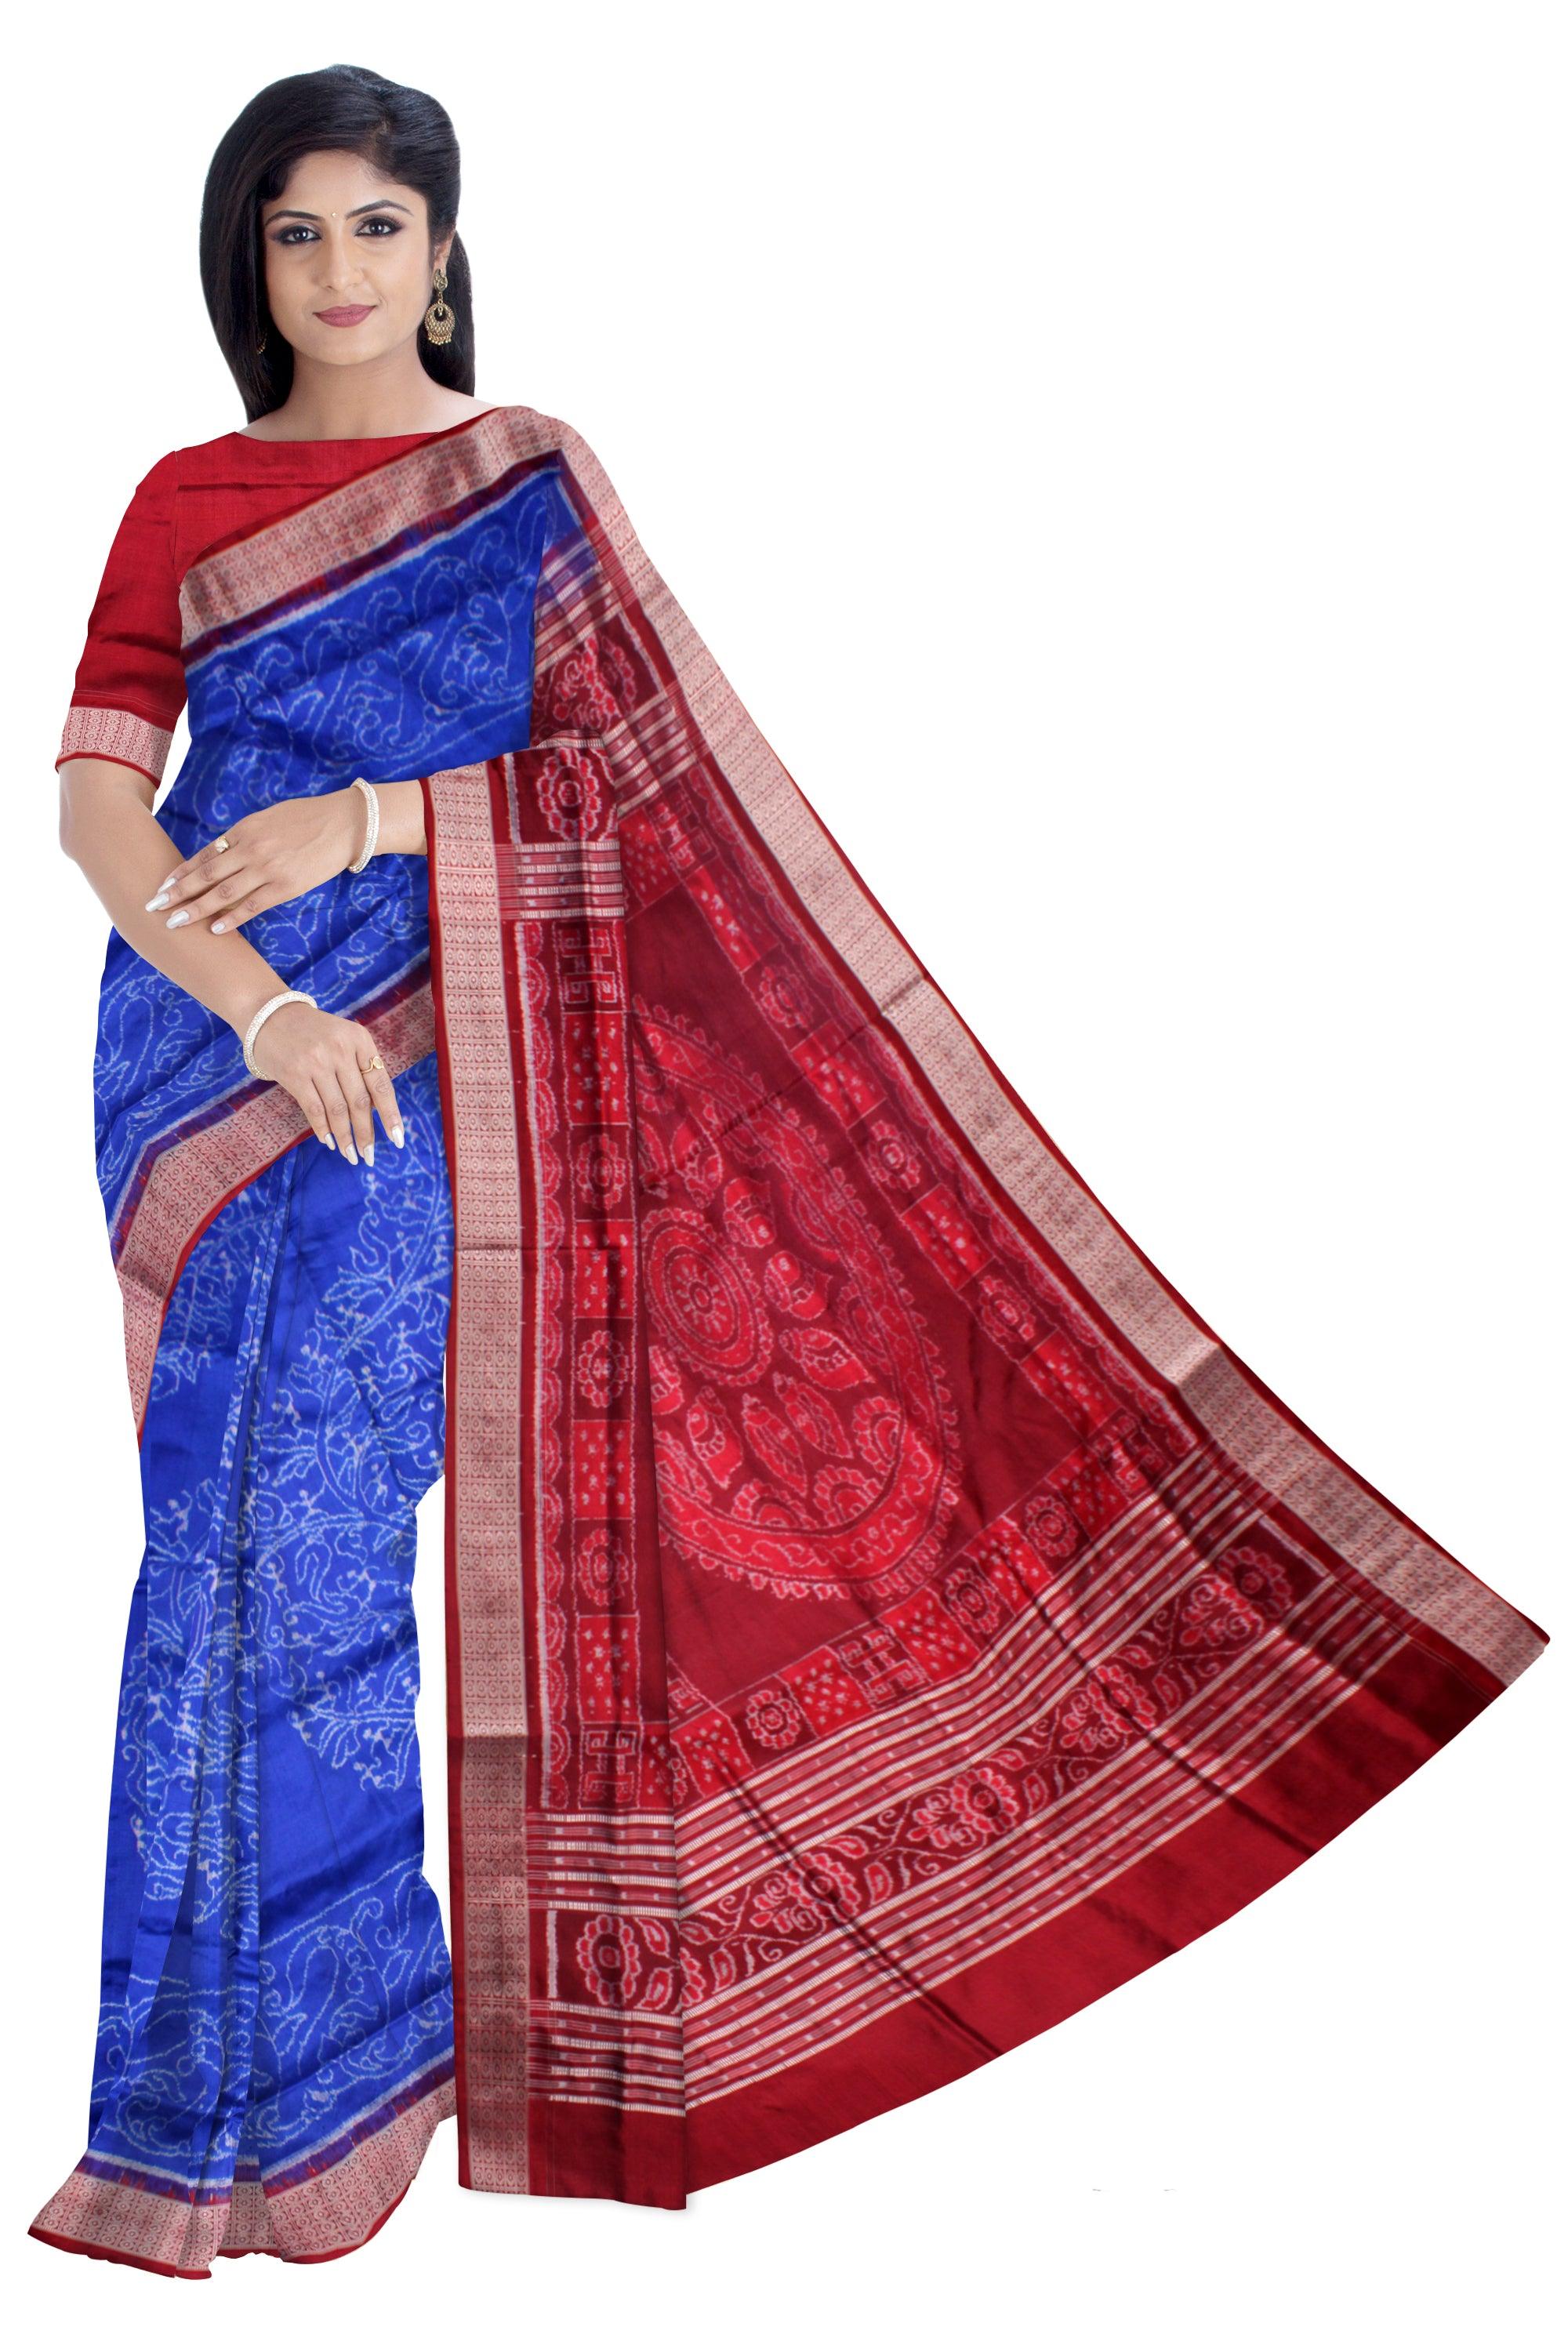 TERRACOTTA WITH TREE PATTERN PURE SILK SAREE IS BLUE AND MAROON COLOR BASE, COMES WITH MATCHING BLOUSE PIECE. - Koshali Arts & Crafts Enterprise